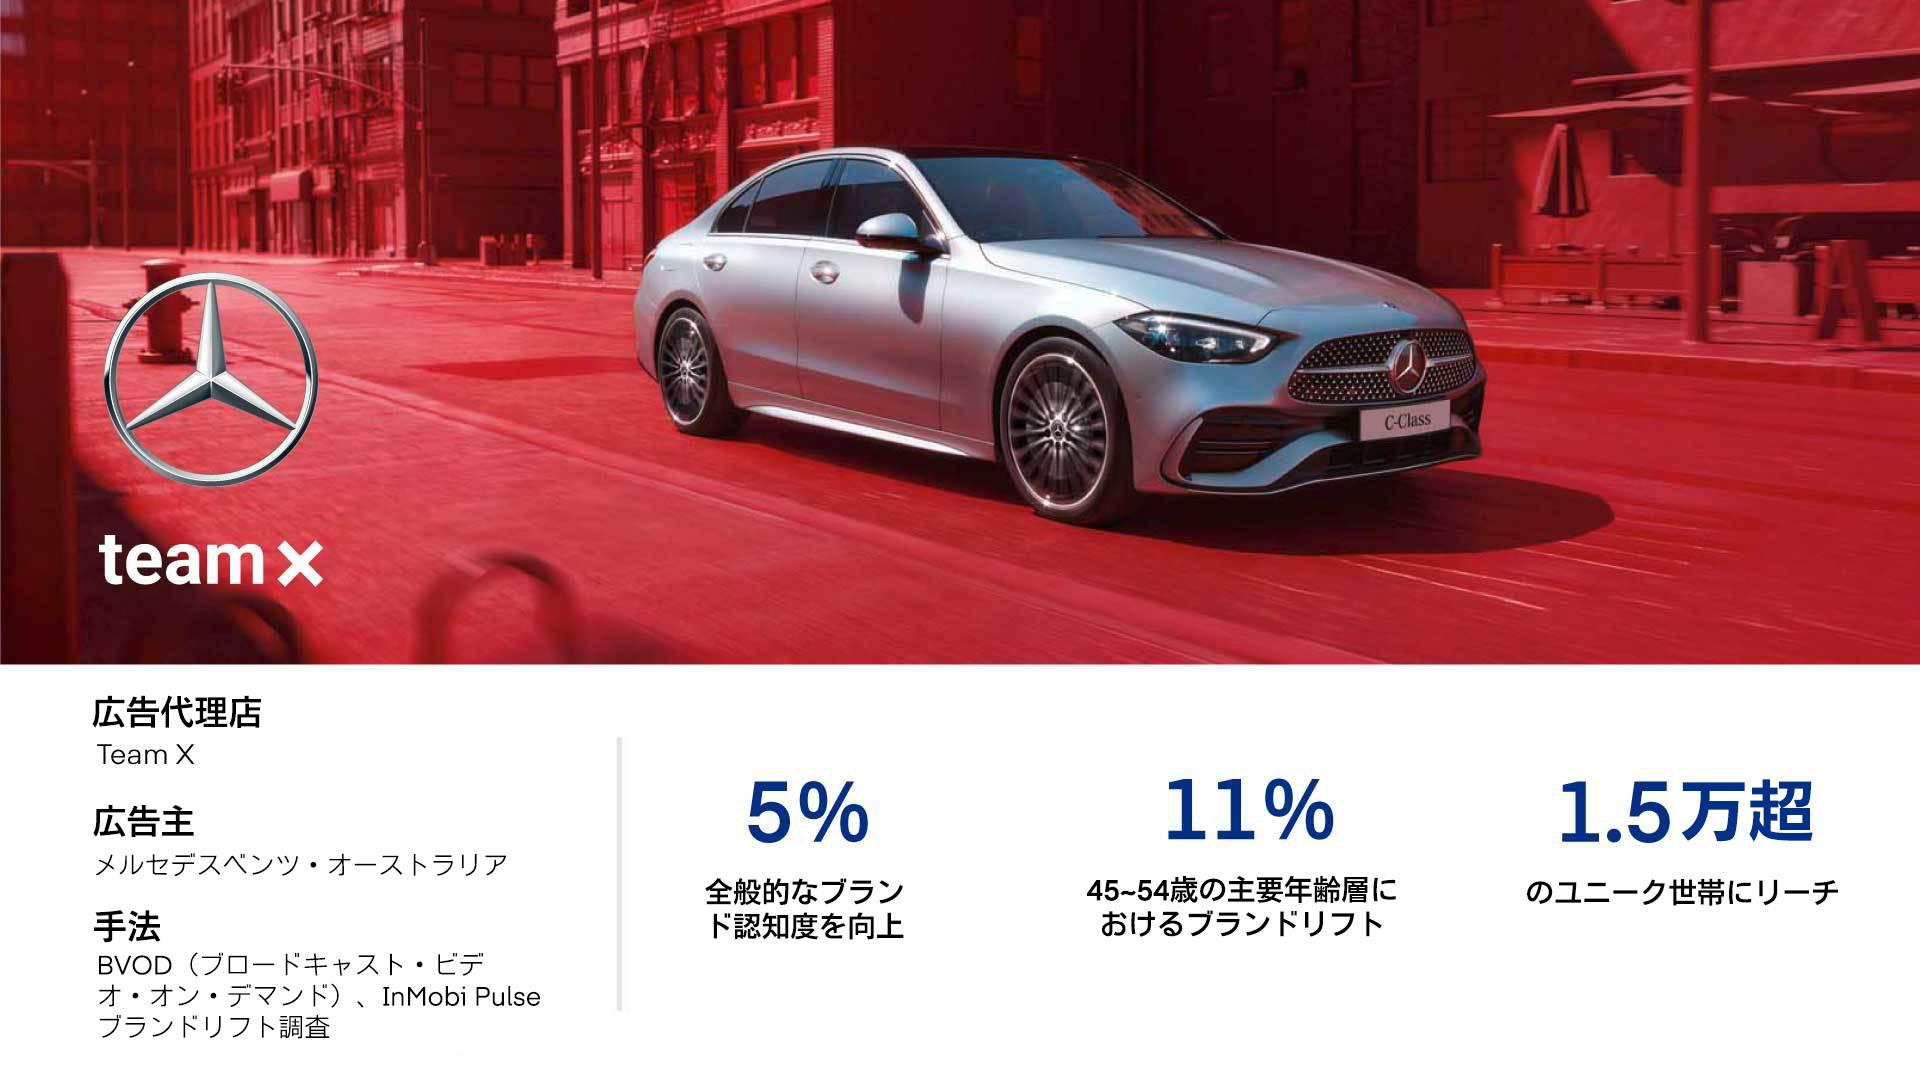 Mercedes Benz + The Trade Desk - Case Study Results